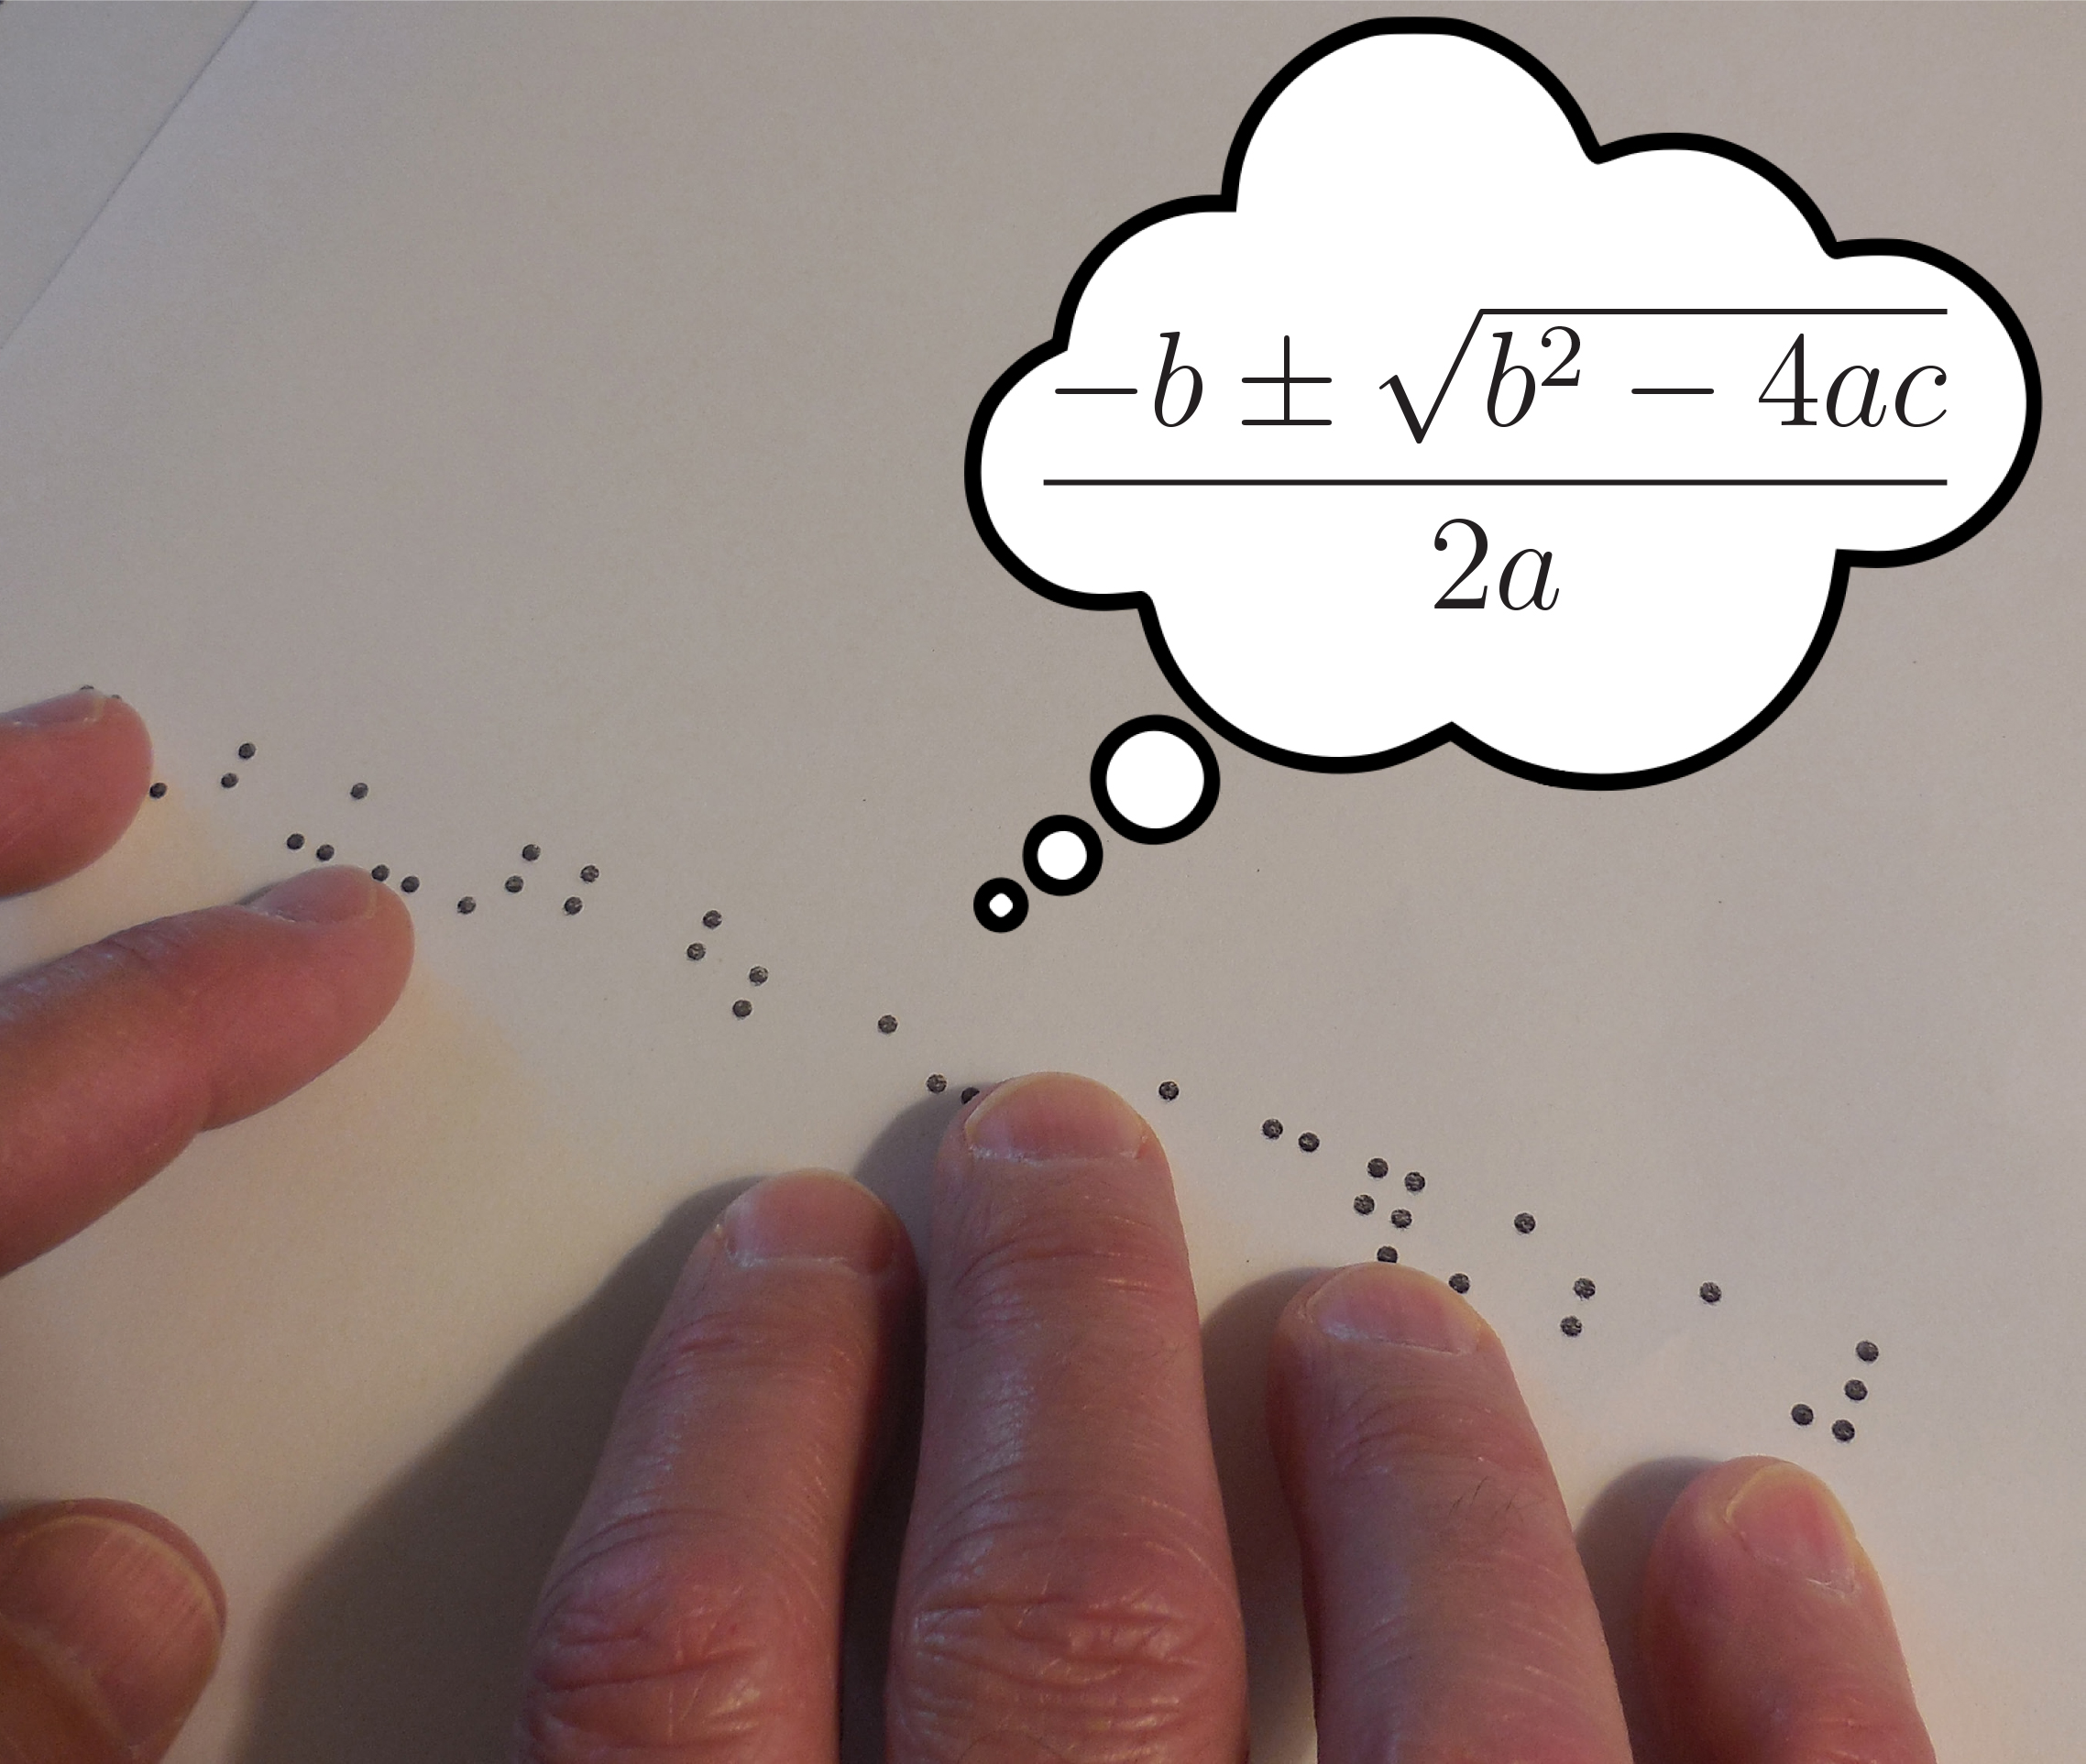 Hands touching Braille symbols, with a thought bubble showing the quadratic formula.